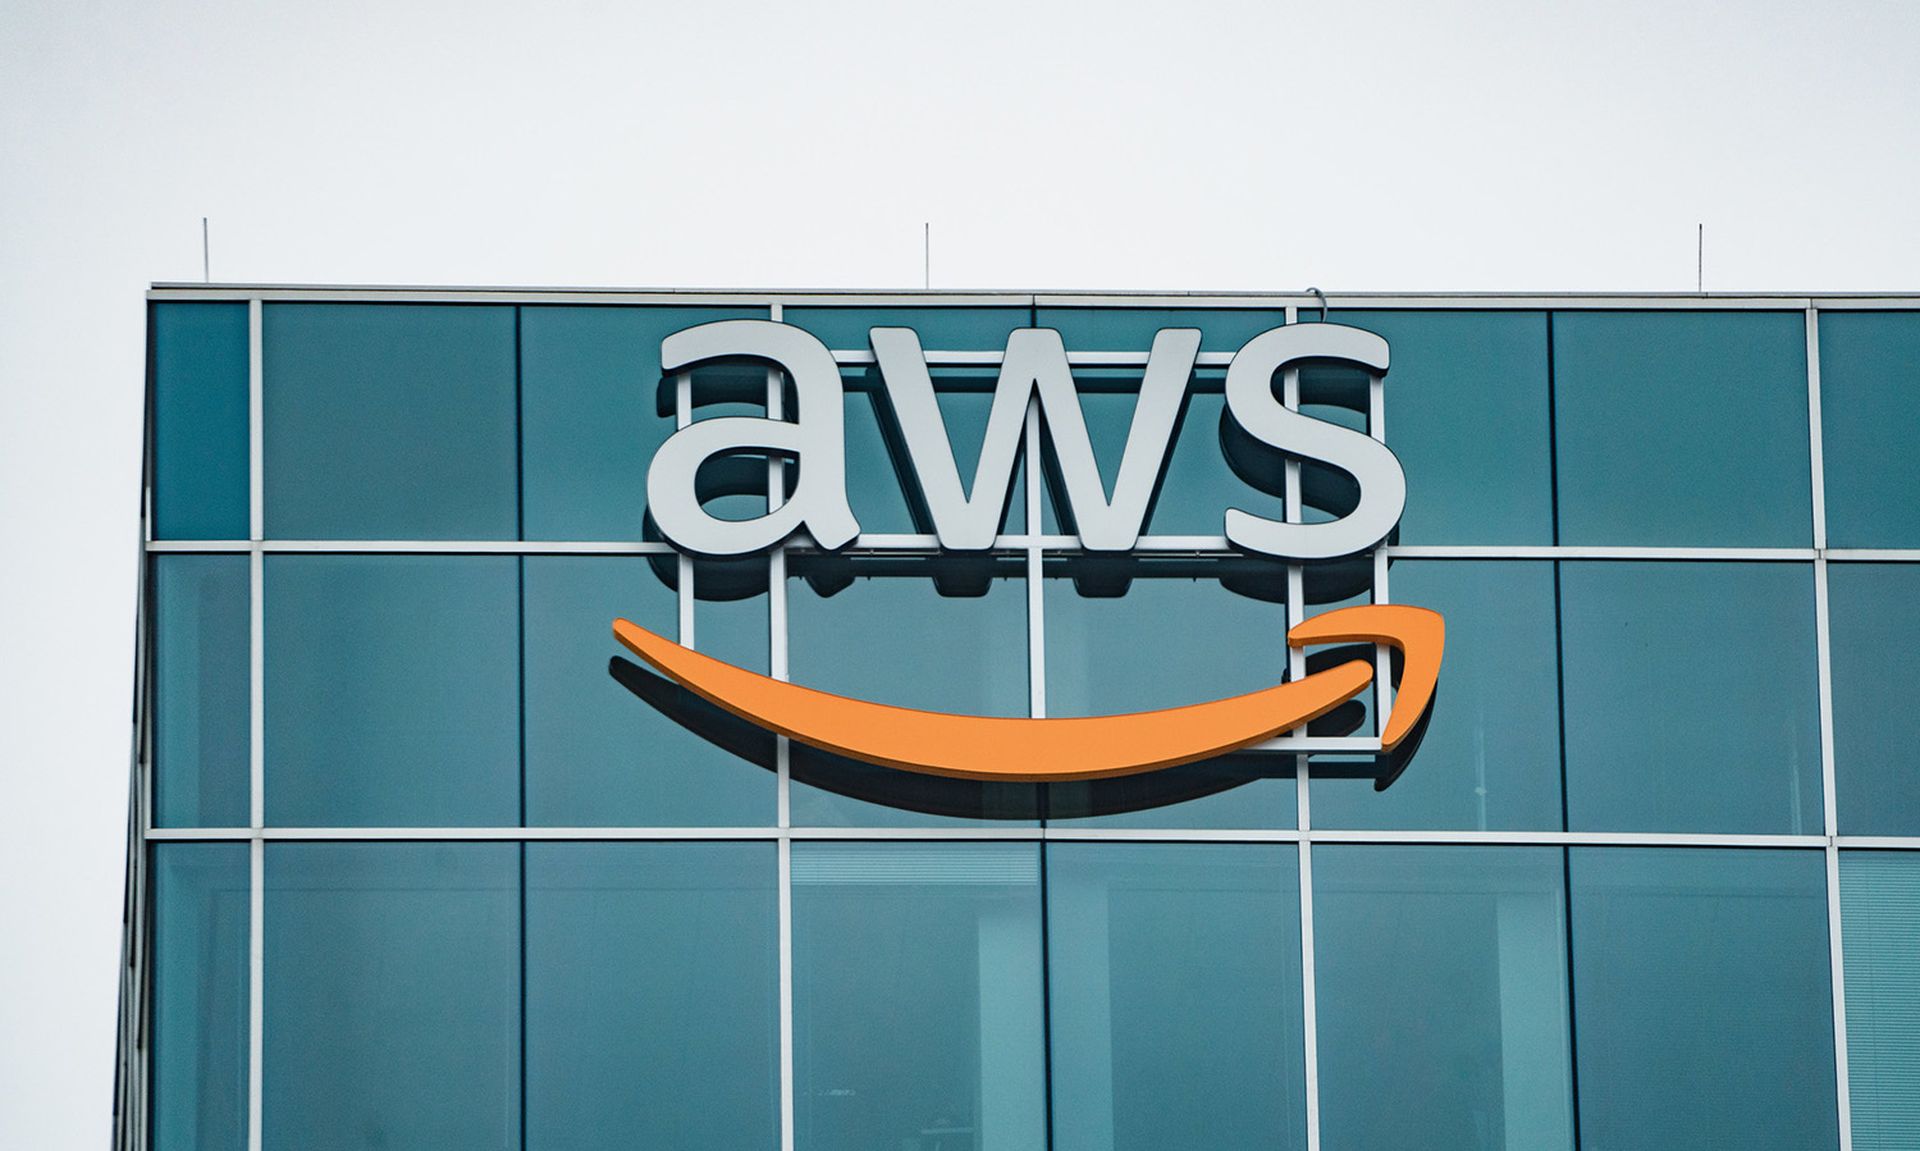 Orca Security researchers reported an AWS Glue misconfiguration that allowed them to escalate privileges and access resources of other AWS accounts. (&#8220;AWS &#8211; Amazon Web Services Office in Houston, Texas&#8221; by Tony Webster is licensed under CC BY 2.0)